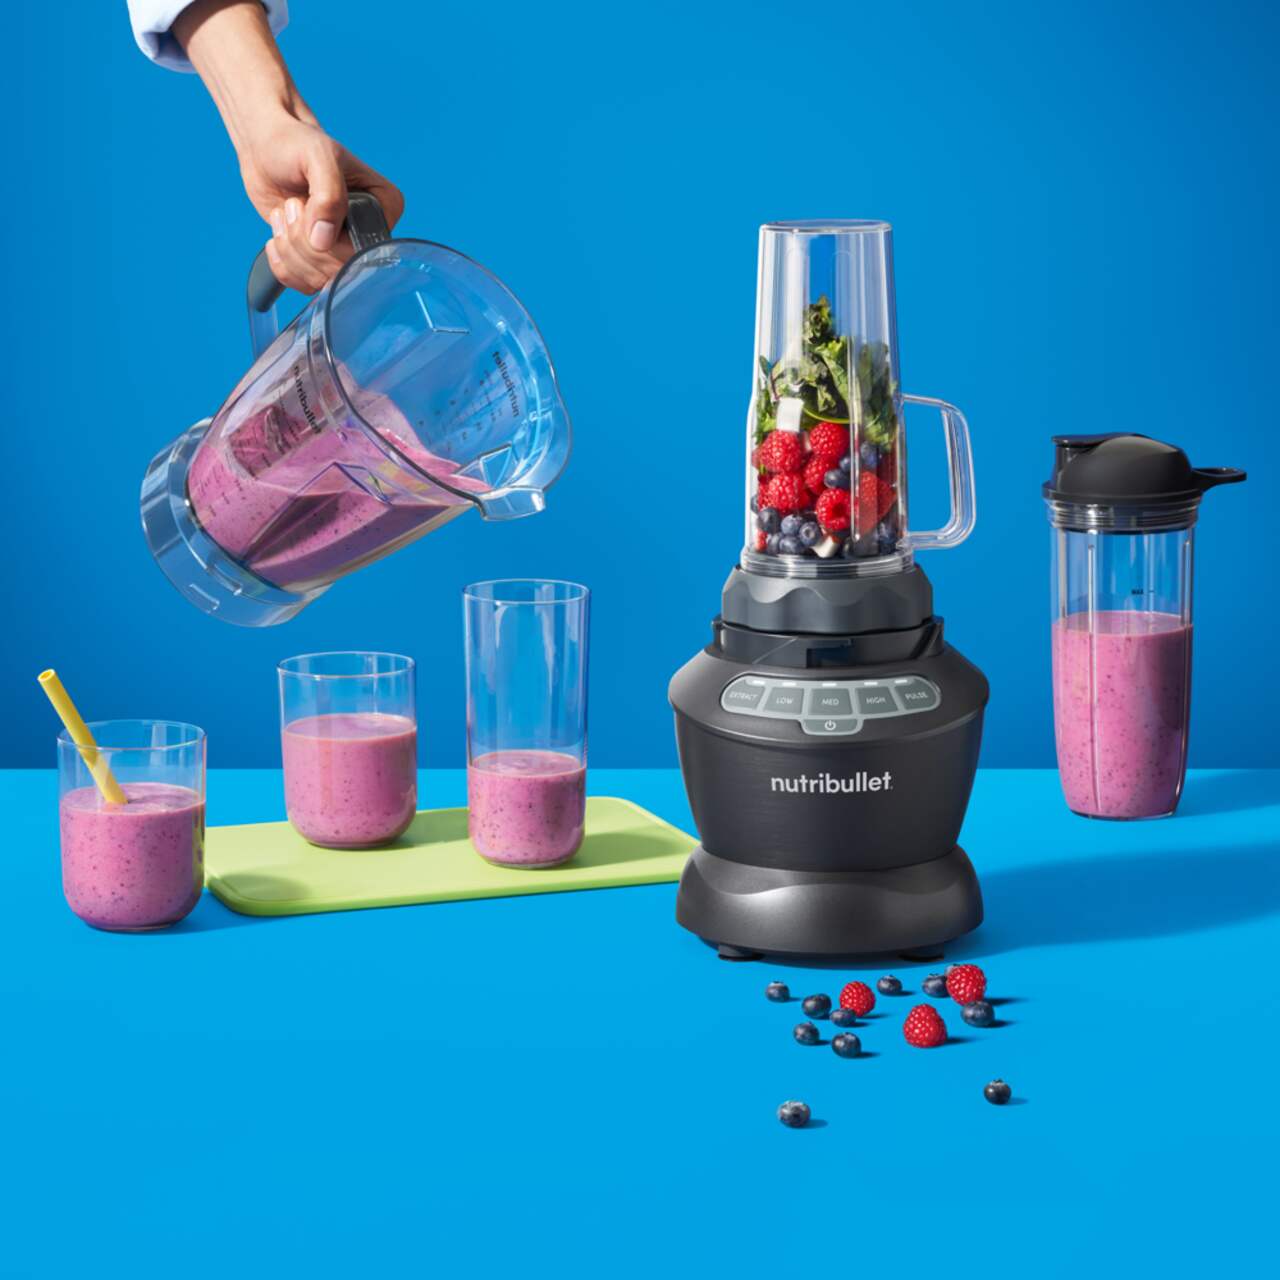 https://media-www.canadiantire.ca/product/living/kitchen/kitchen-appliances/0432702/nutri-bullet-combo-blender-d6381d0c-5886-4baf-84bf-b847430c9d6f.png?imdensity=1&imwidth=1244&impolicy=mZoom